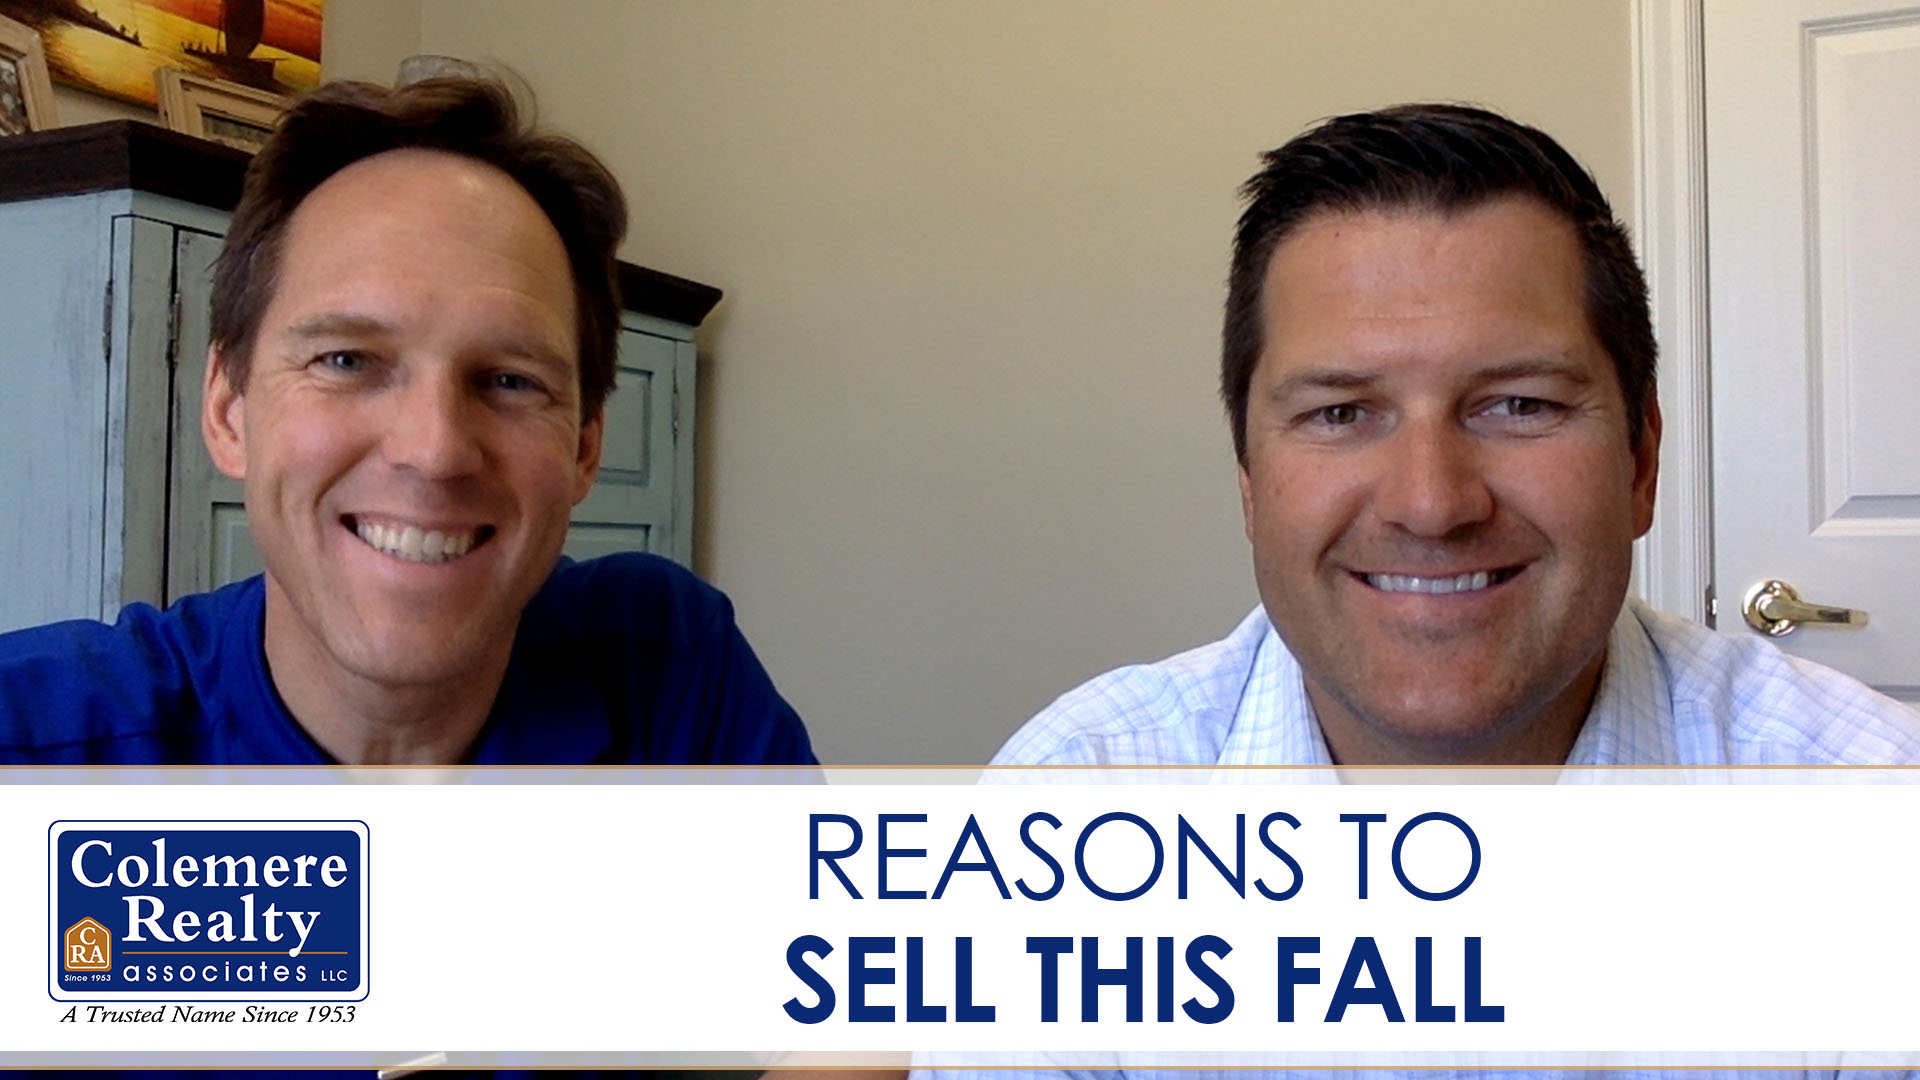 What Makes Fall a Great Time to Put Your Home on the Market?